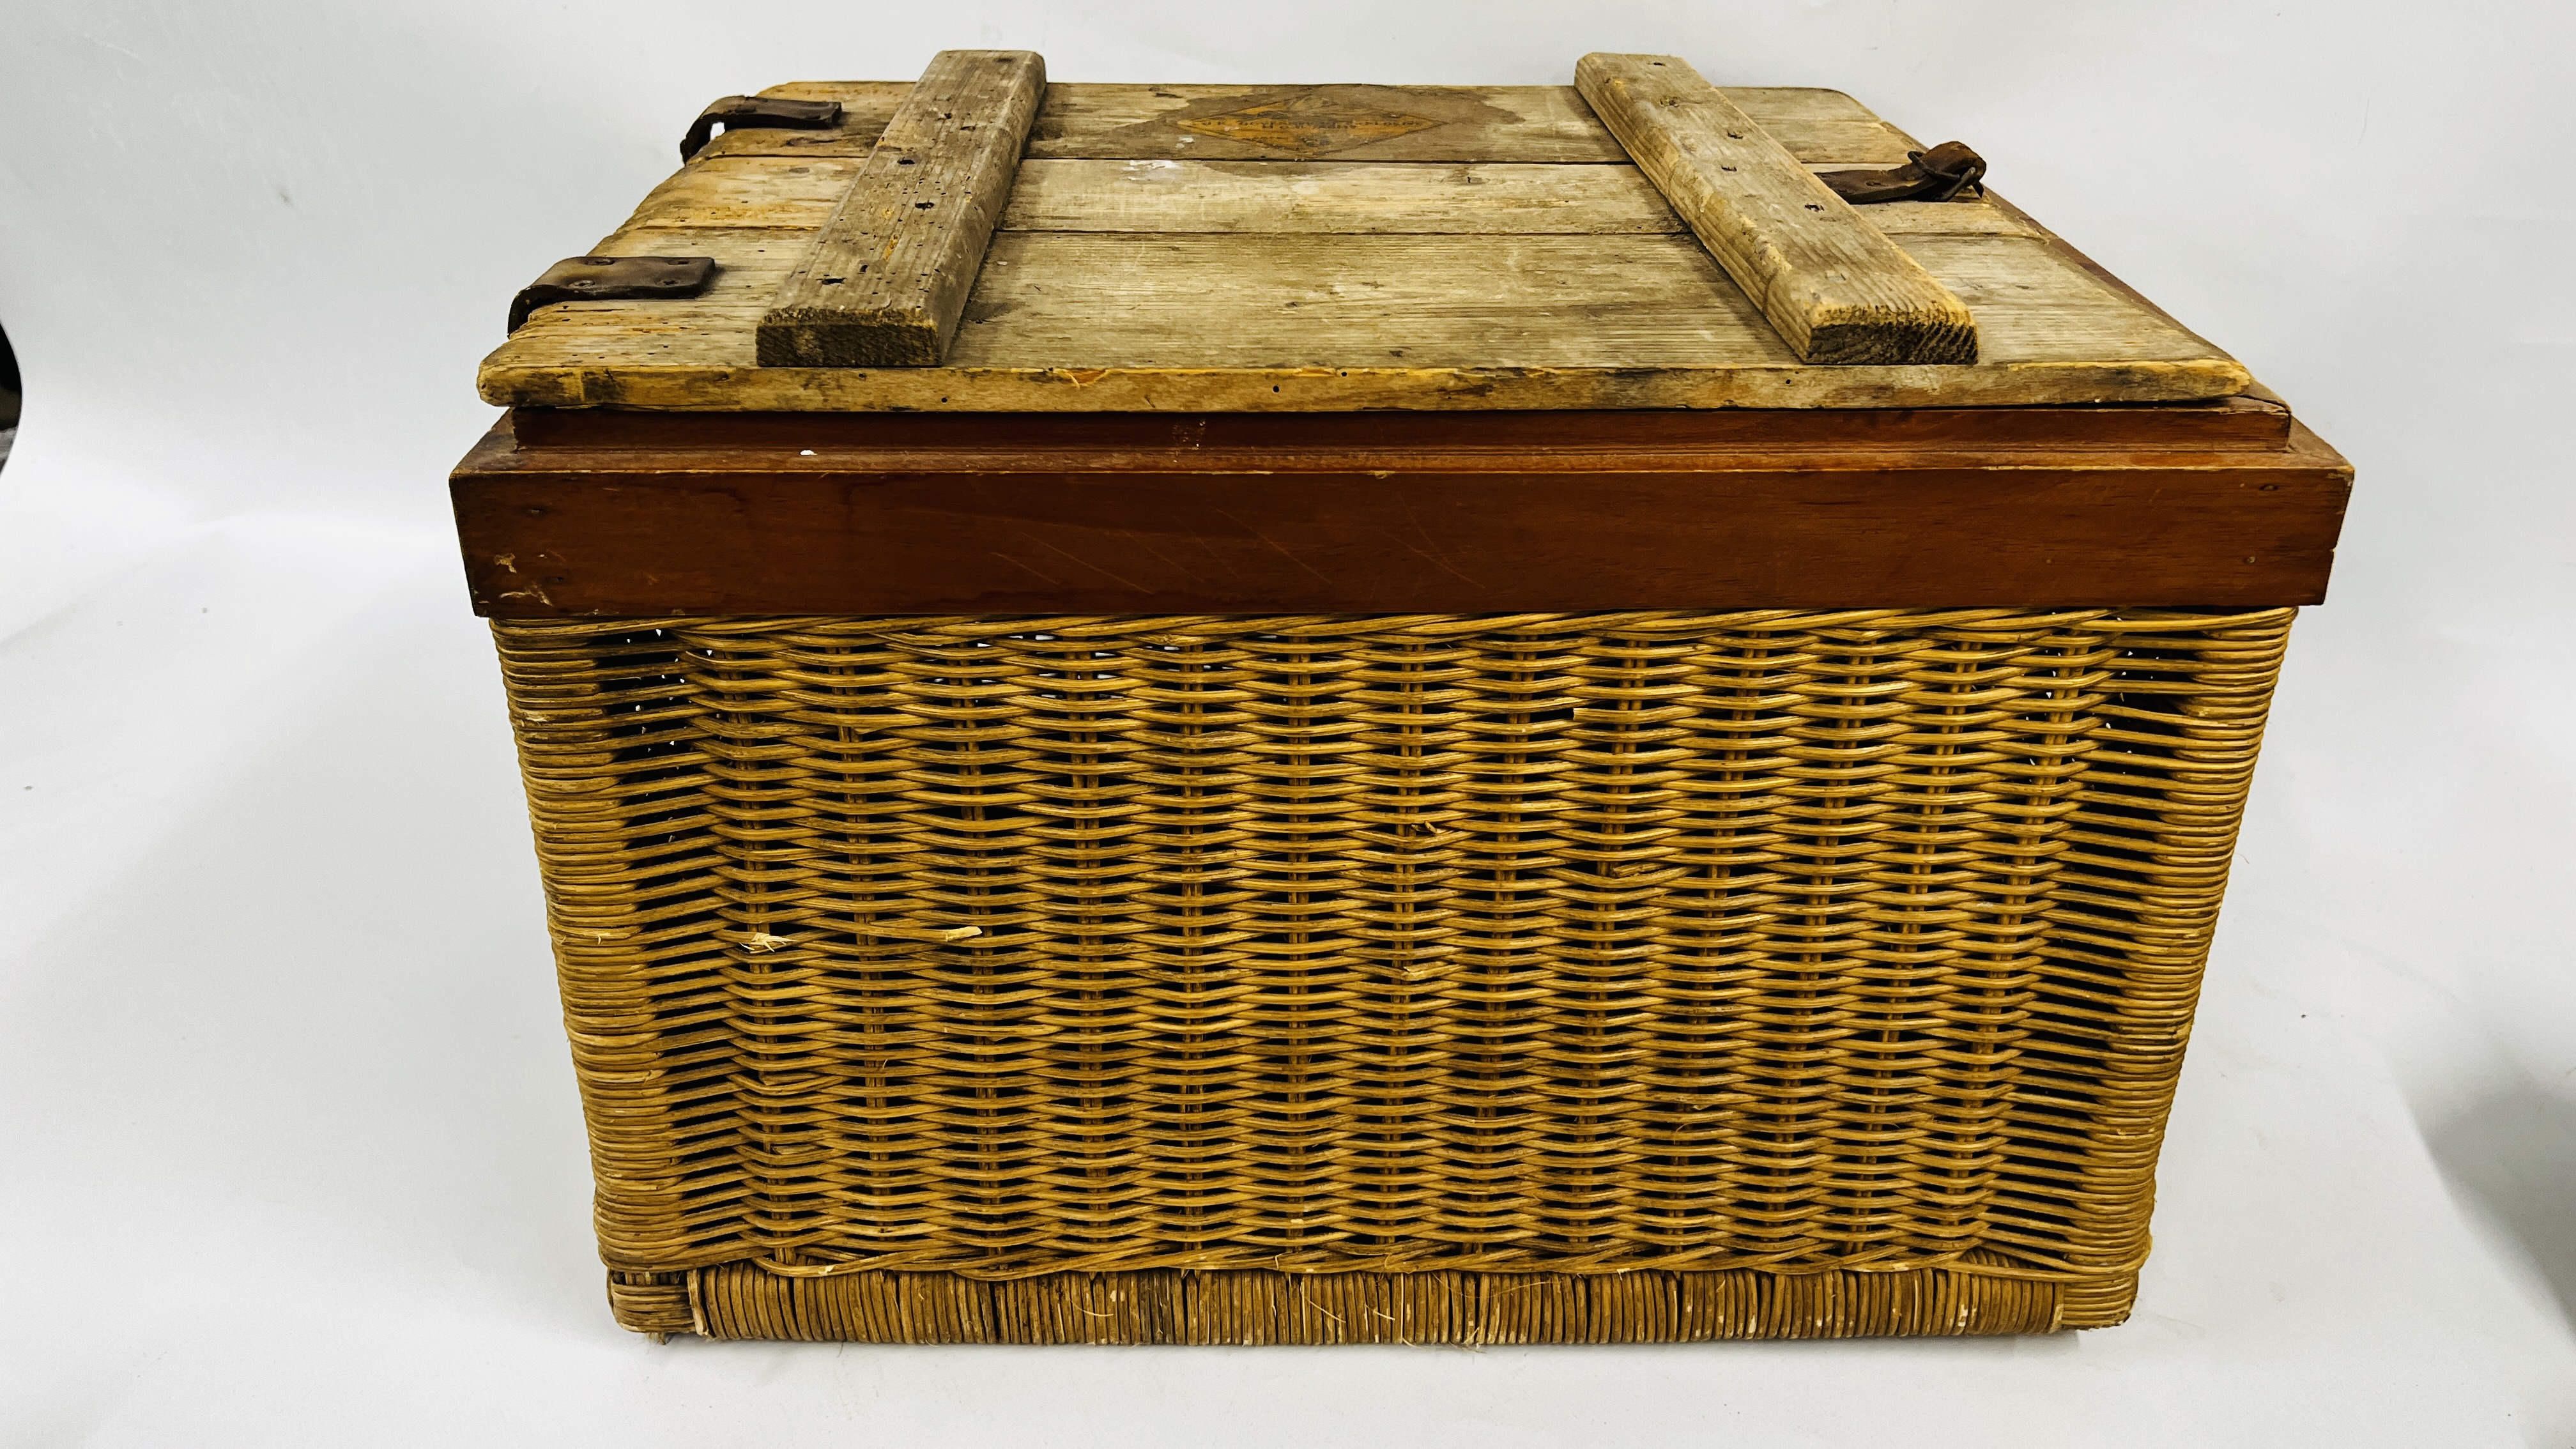 A COLLECTION OF MILITARY UNIFORMS IN A WICKER M.O.D. BOX. - Image 14 of 17